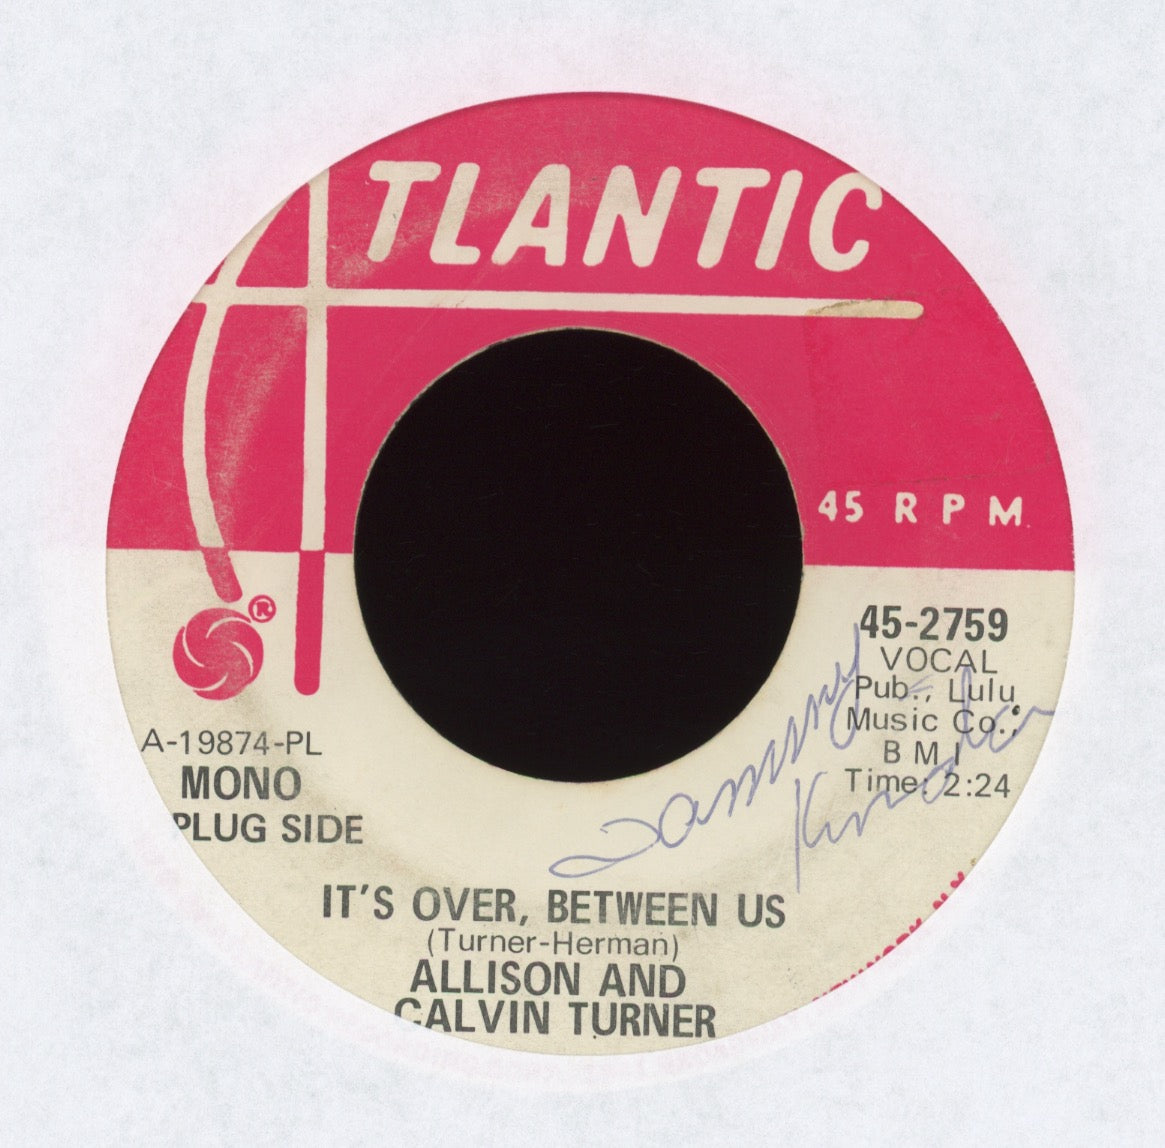 Allison and Calvin Turner - It's Over, Between Us on Atlantic Promo